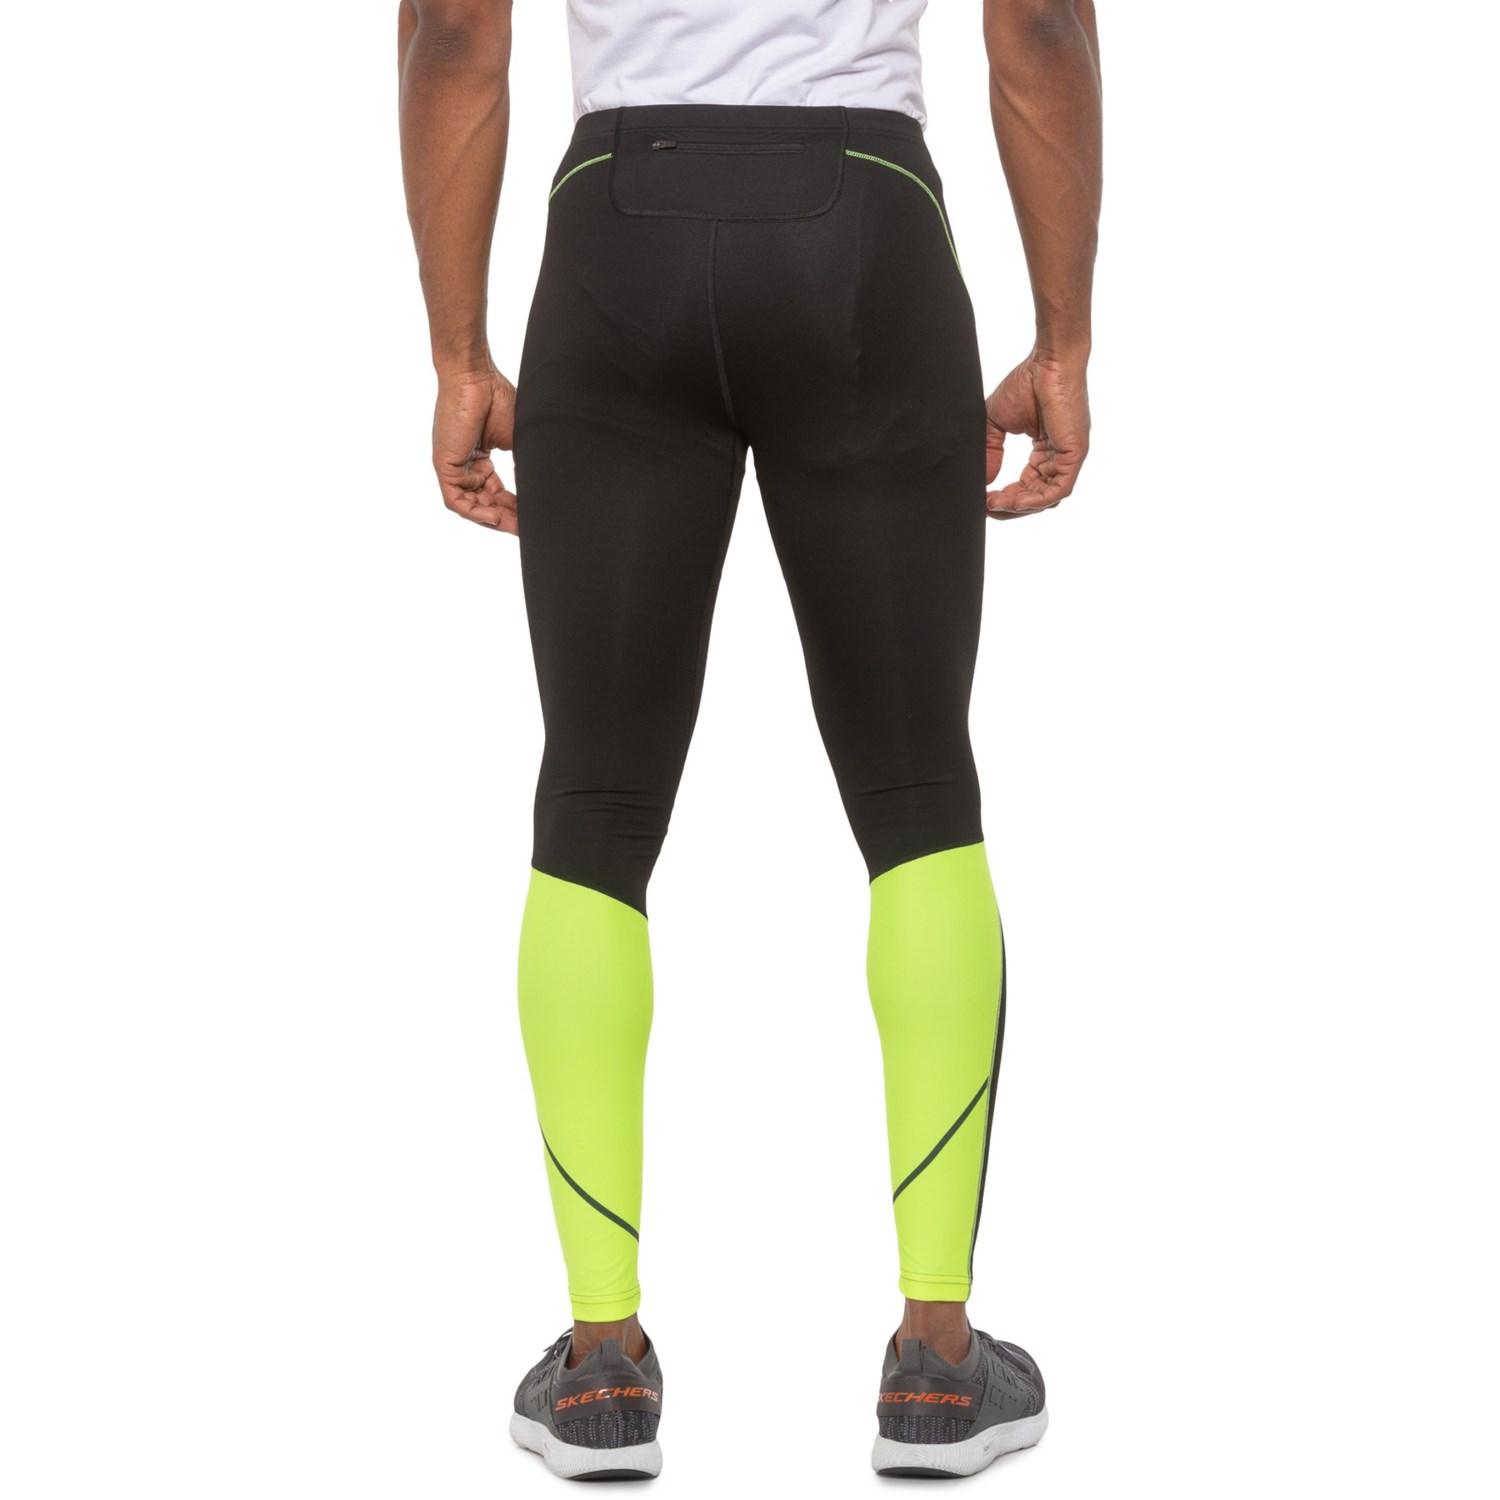 GORE WEAR R3 Running Tights (For Men) - Save 50%